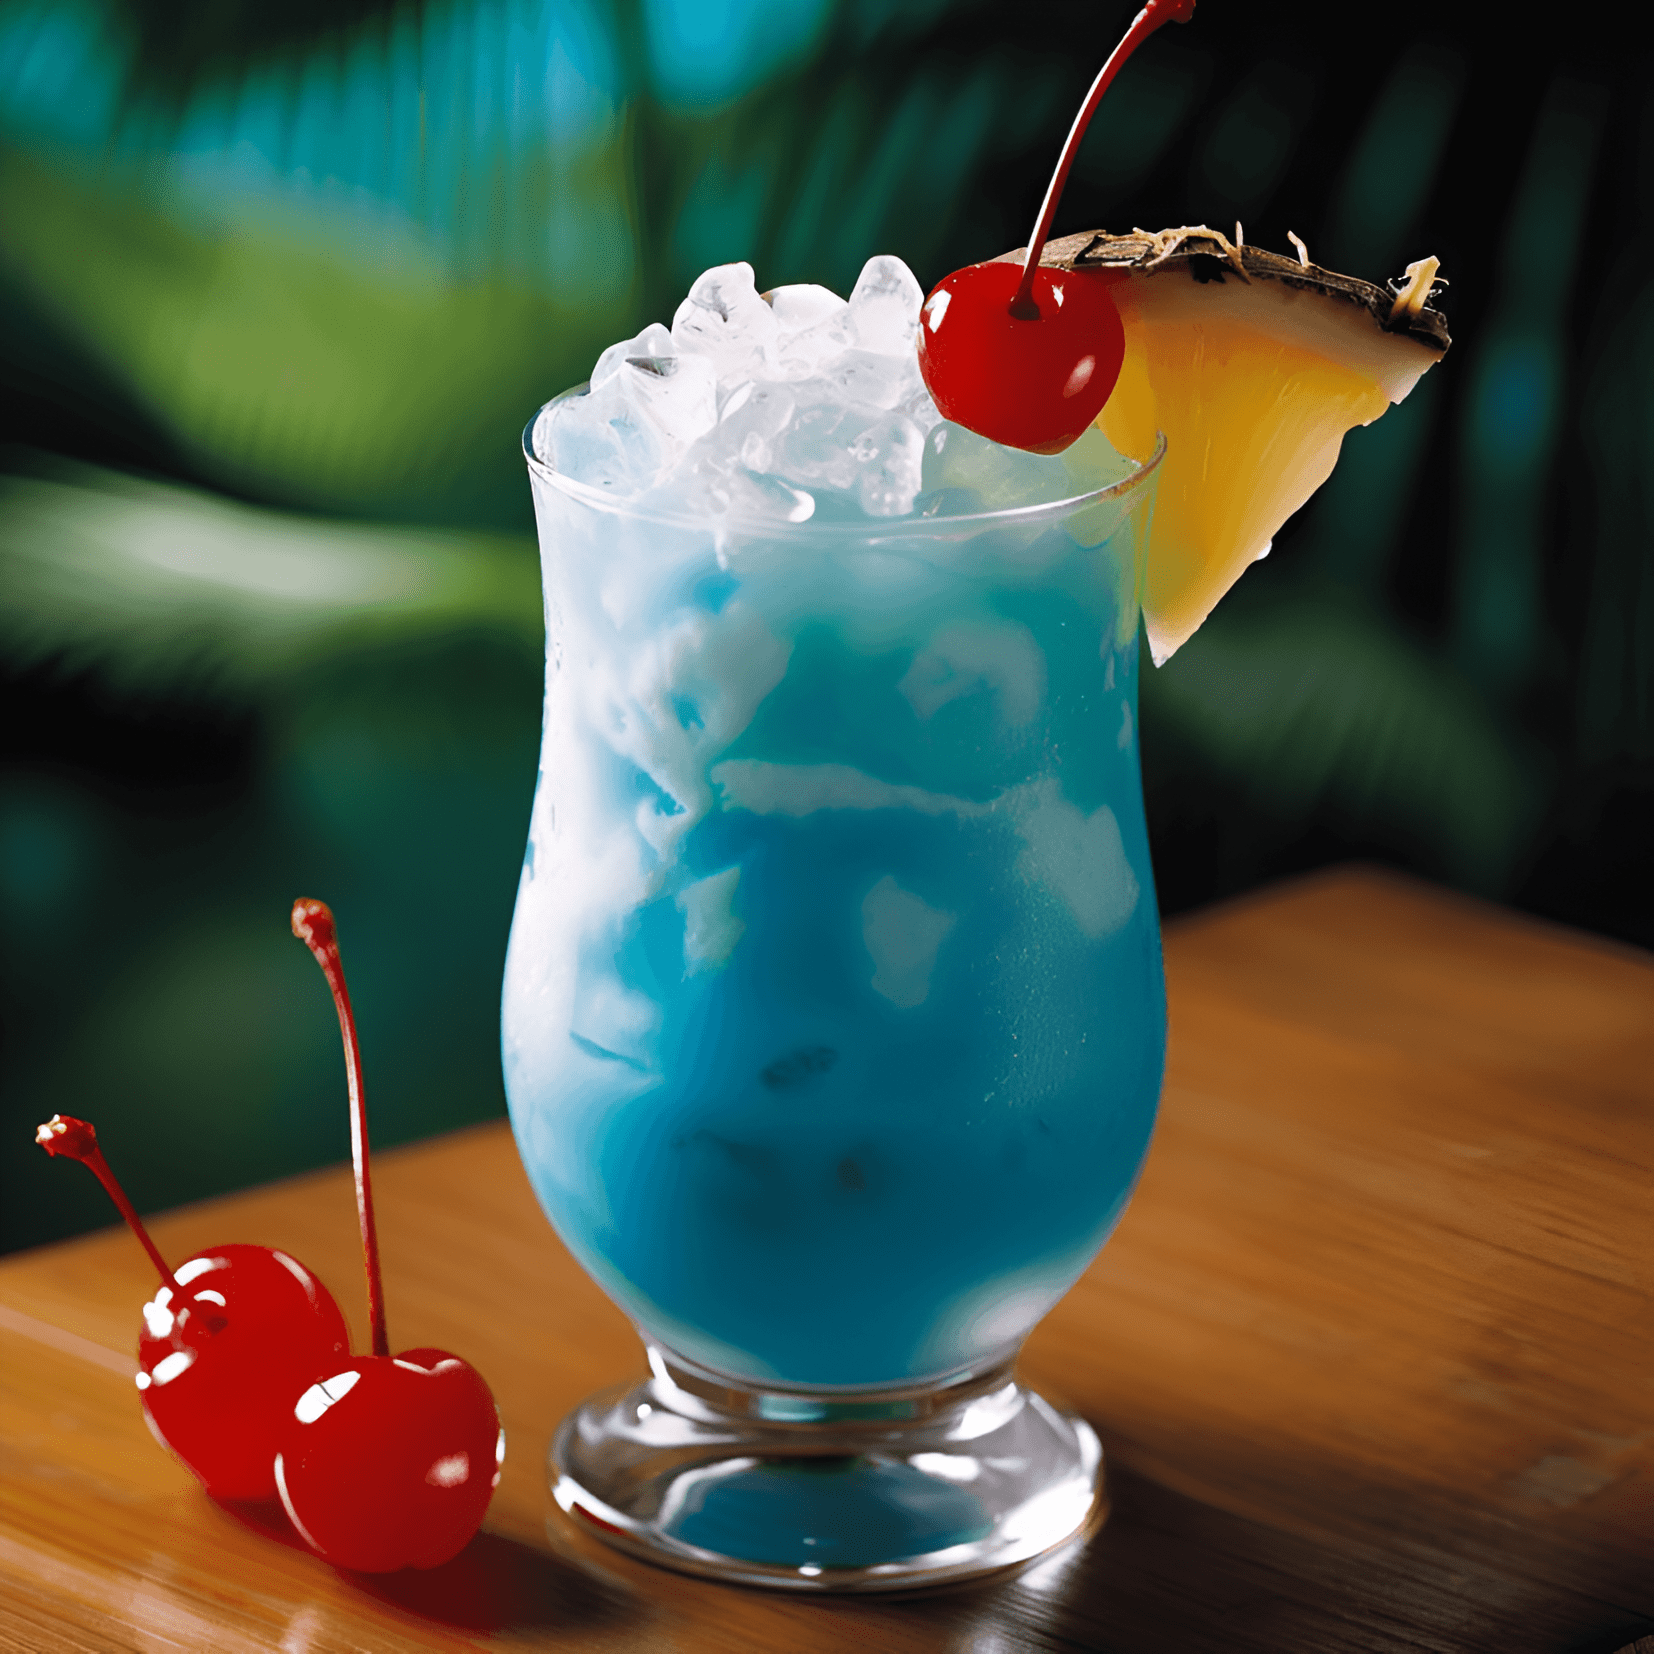 The Blue Hawaii cocktail has a refreshing, sweet, and slightly tangy taste. The combination of pineapple juice, sweet and sour mix, and Blue Curaçao creates a fruity and tropical flavor profile, while the vodka and light rum add a subtle kick.